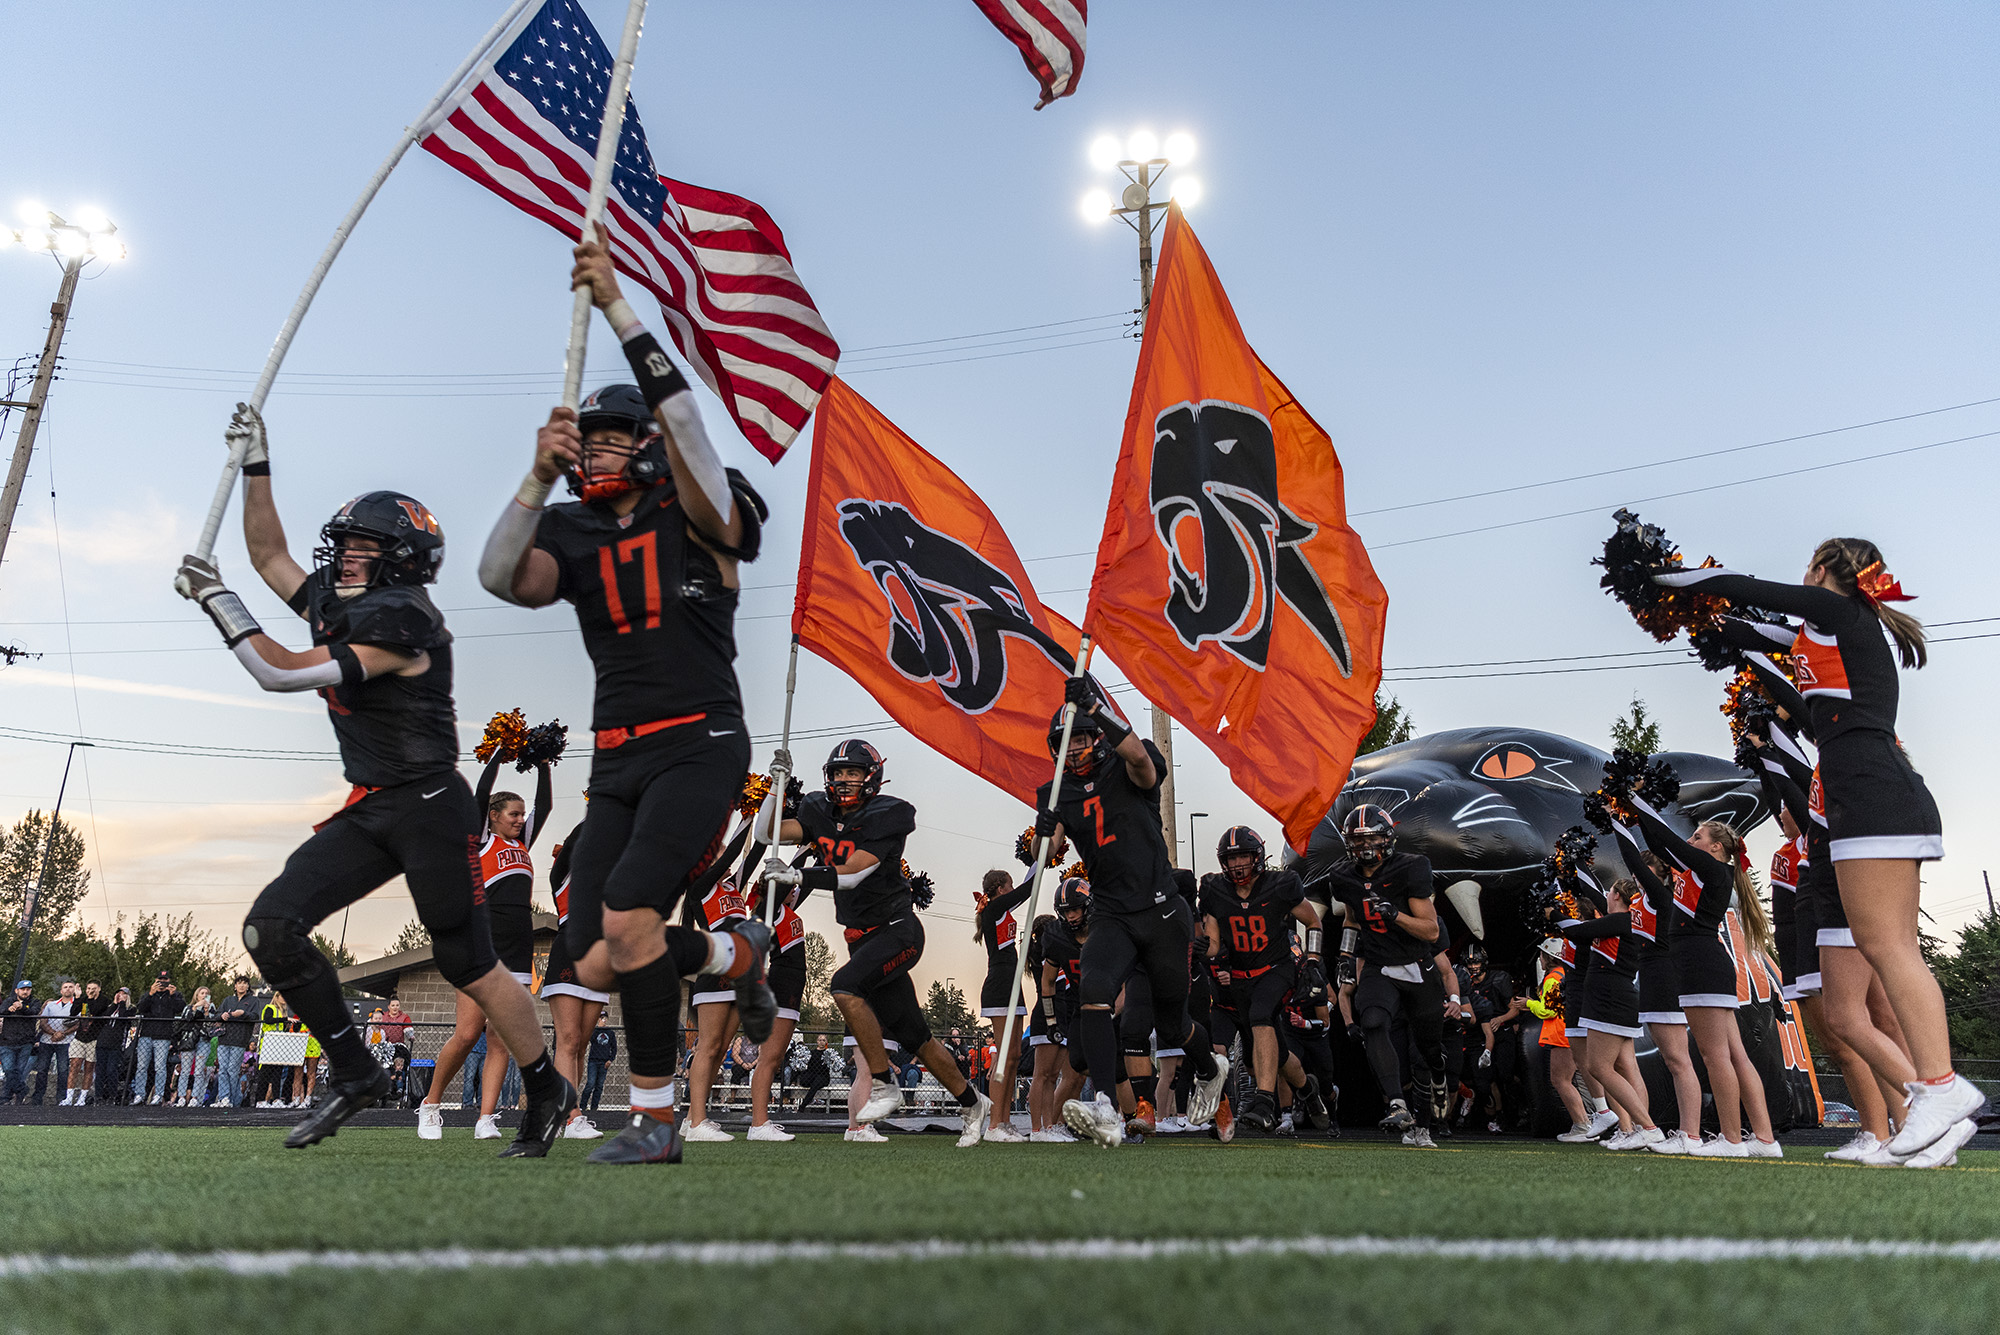 Washougal’s football team storms onto the field Friday, Sept. 23, 2022, before the Panthers’ 39-22 win against Mark Morris at Washougal High School.